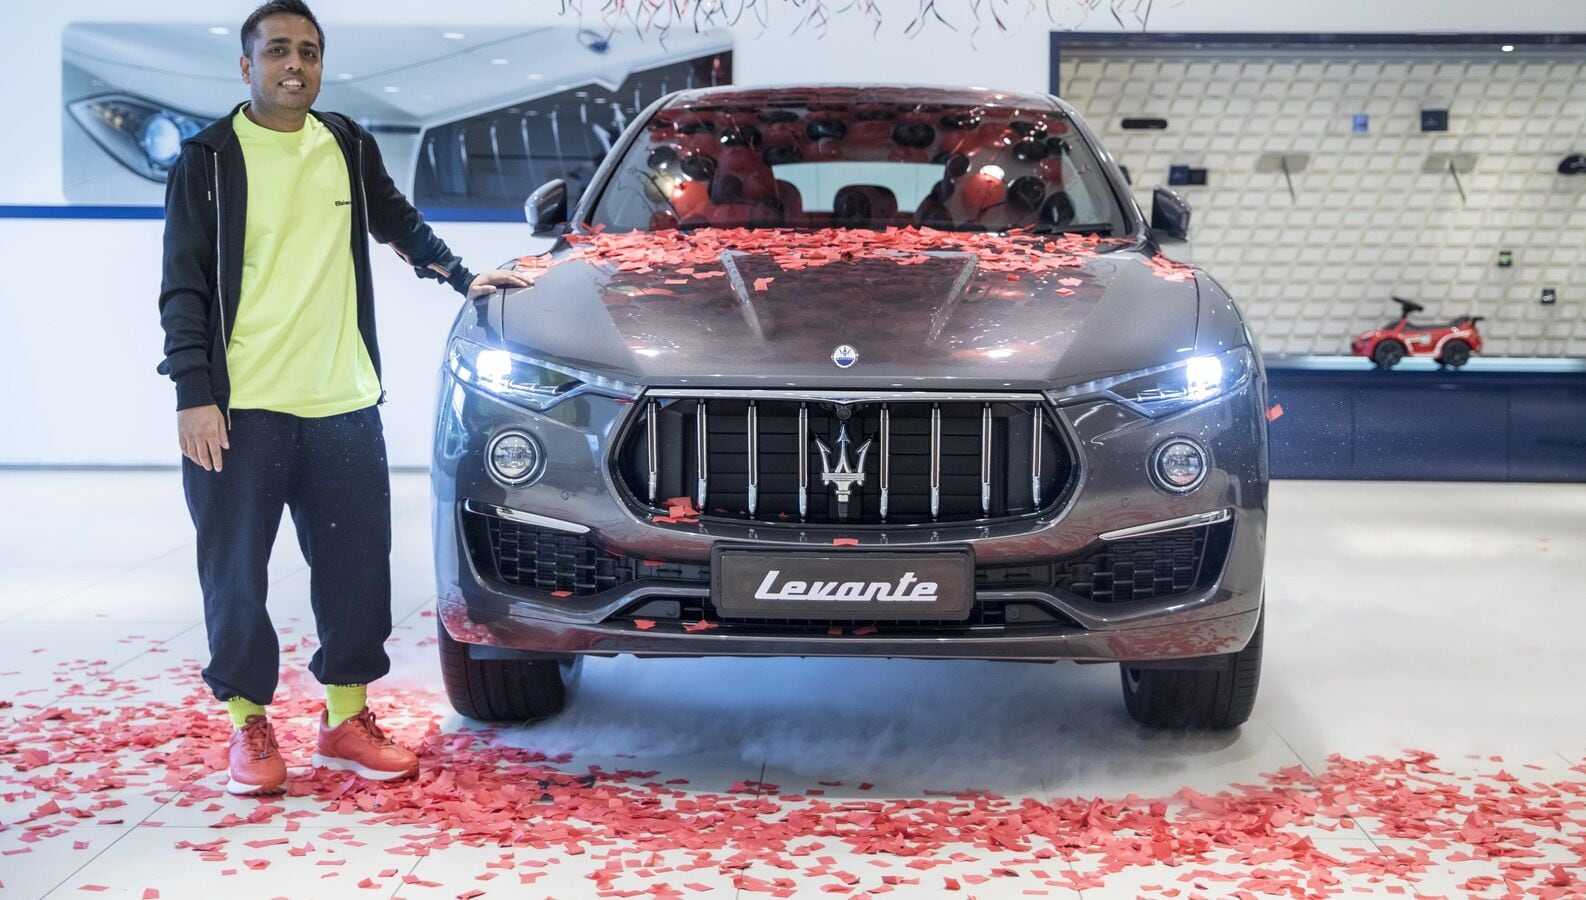 Maserati delivers the first unit of Levante GT Hybrid luxury SUV to its customer